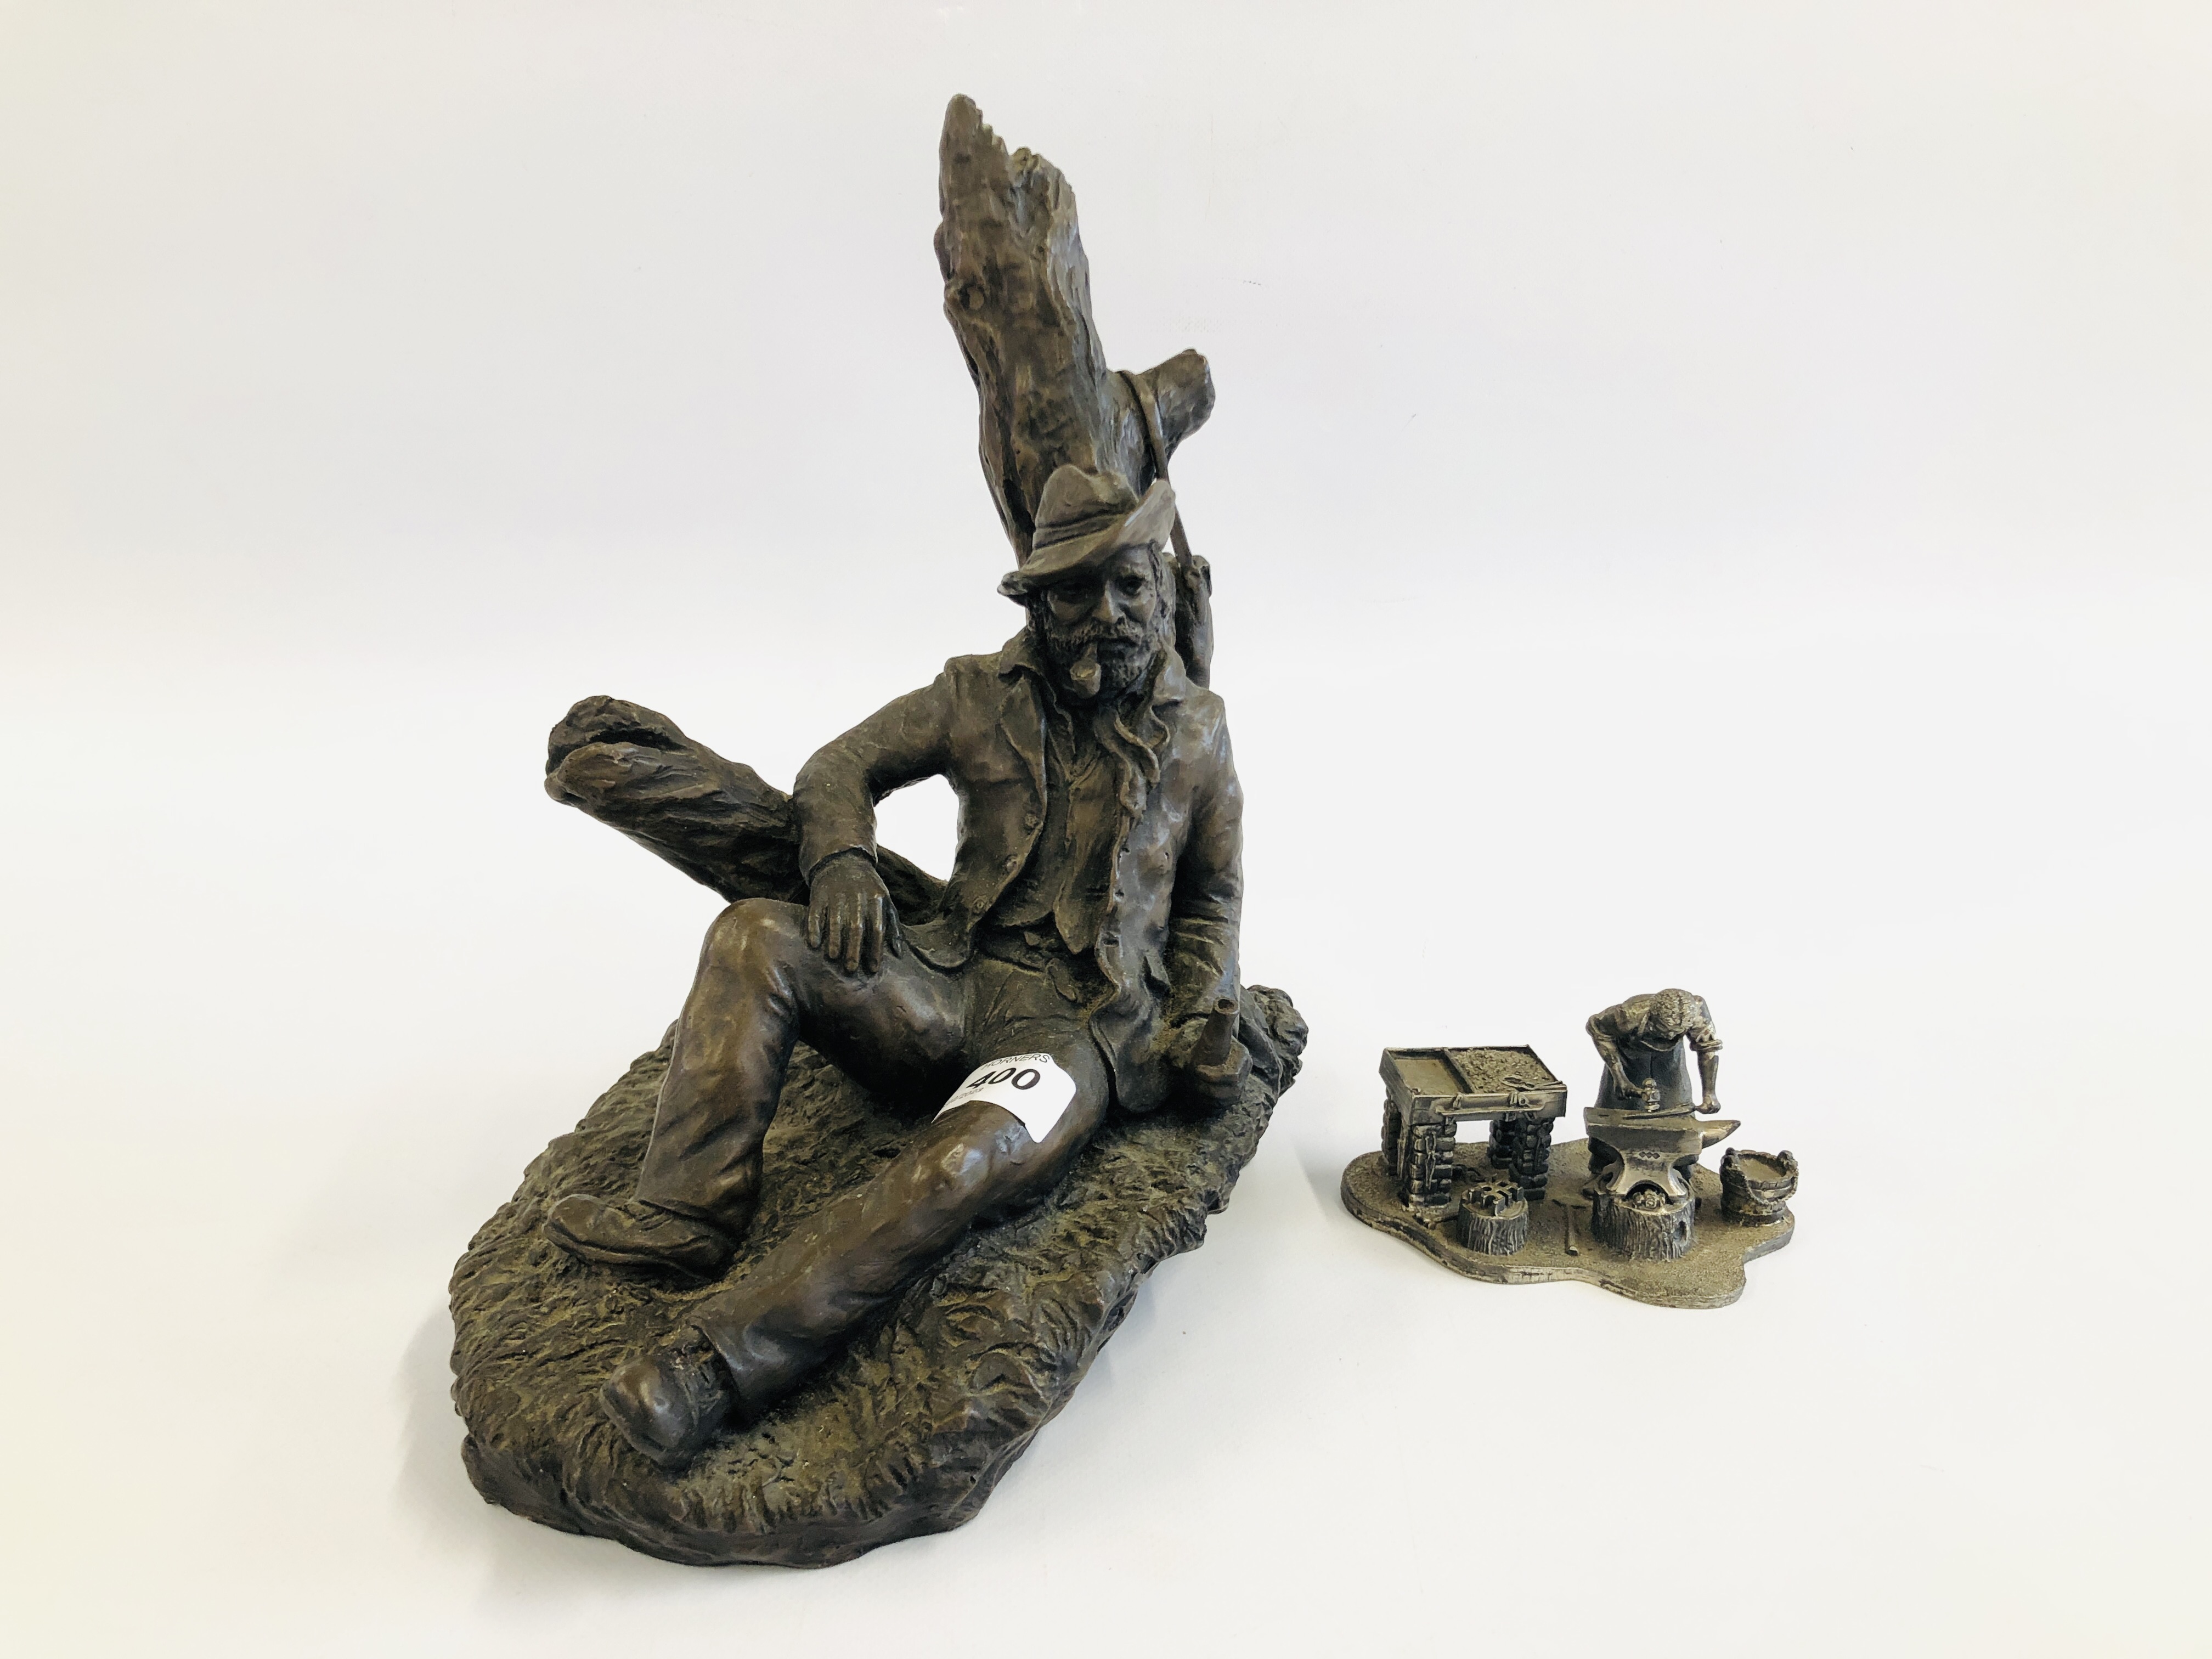 A MODERN BRONZED SCULPTURE OF A SEATED GENTLEMAN AGAINST A TREE STUMP ALONG WITH "THE LEONARDO